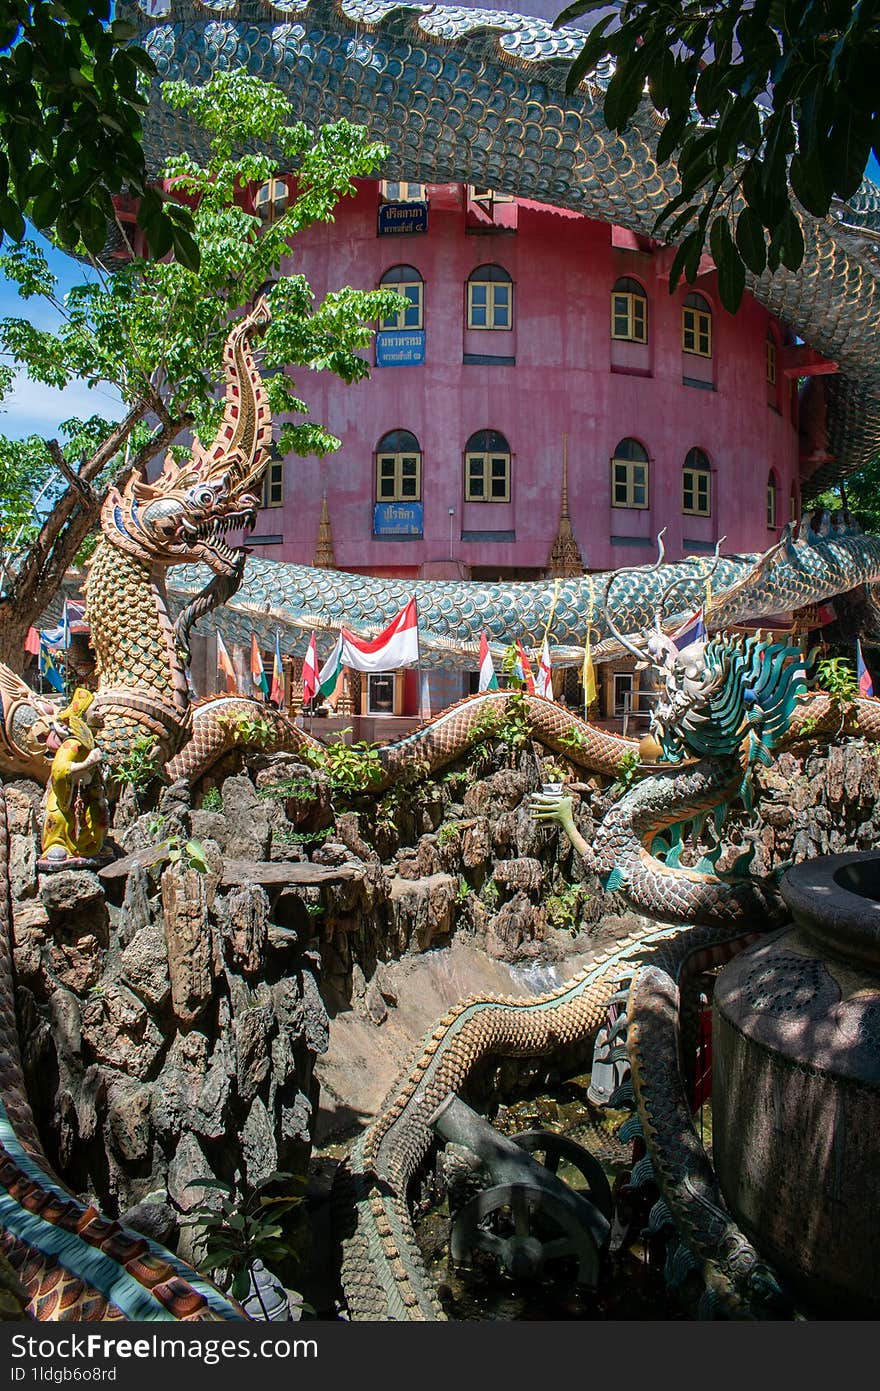 Dragon temple or Wat Samphran  This amazing and so uniq pink temple with dragon around its one of my favorite.  The temple is a blend of Chinese beliefs and Thai culture and beliefs brought in by the local monks.